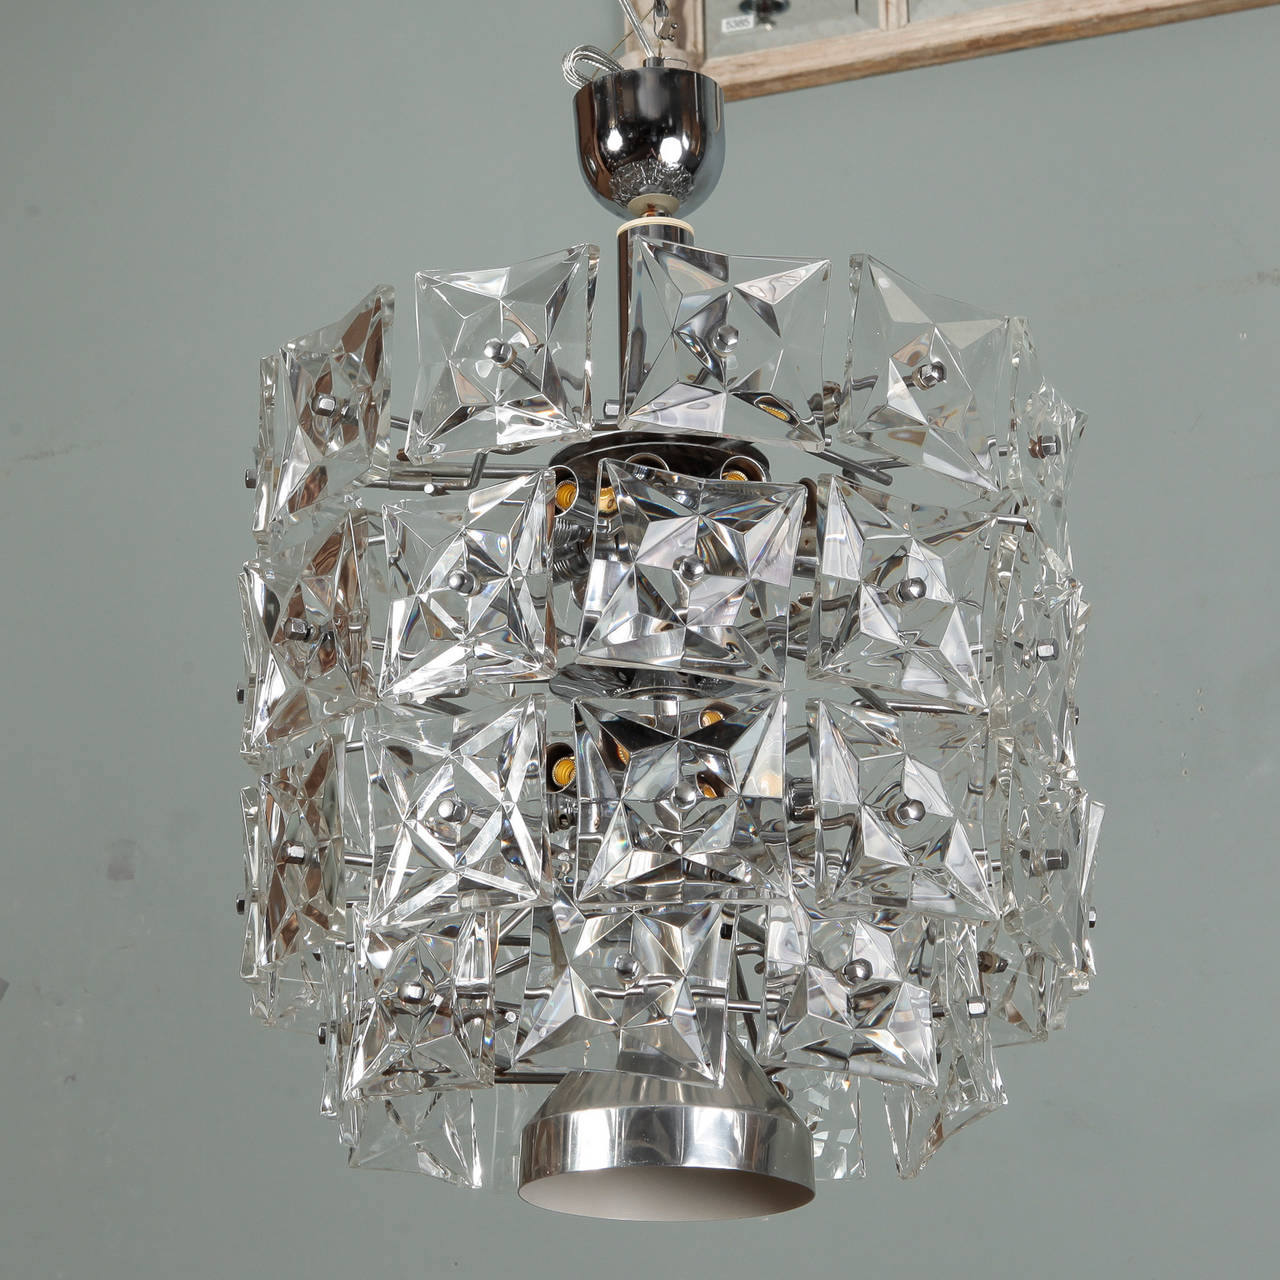 Circa 1960 tall pendant fixture by Austrian manufacturer Kinkeldey with large square shaped crystals. Nickel ceiling canopy and new wiring for US electrical standards.